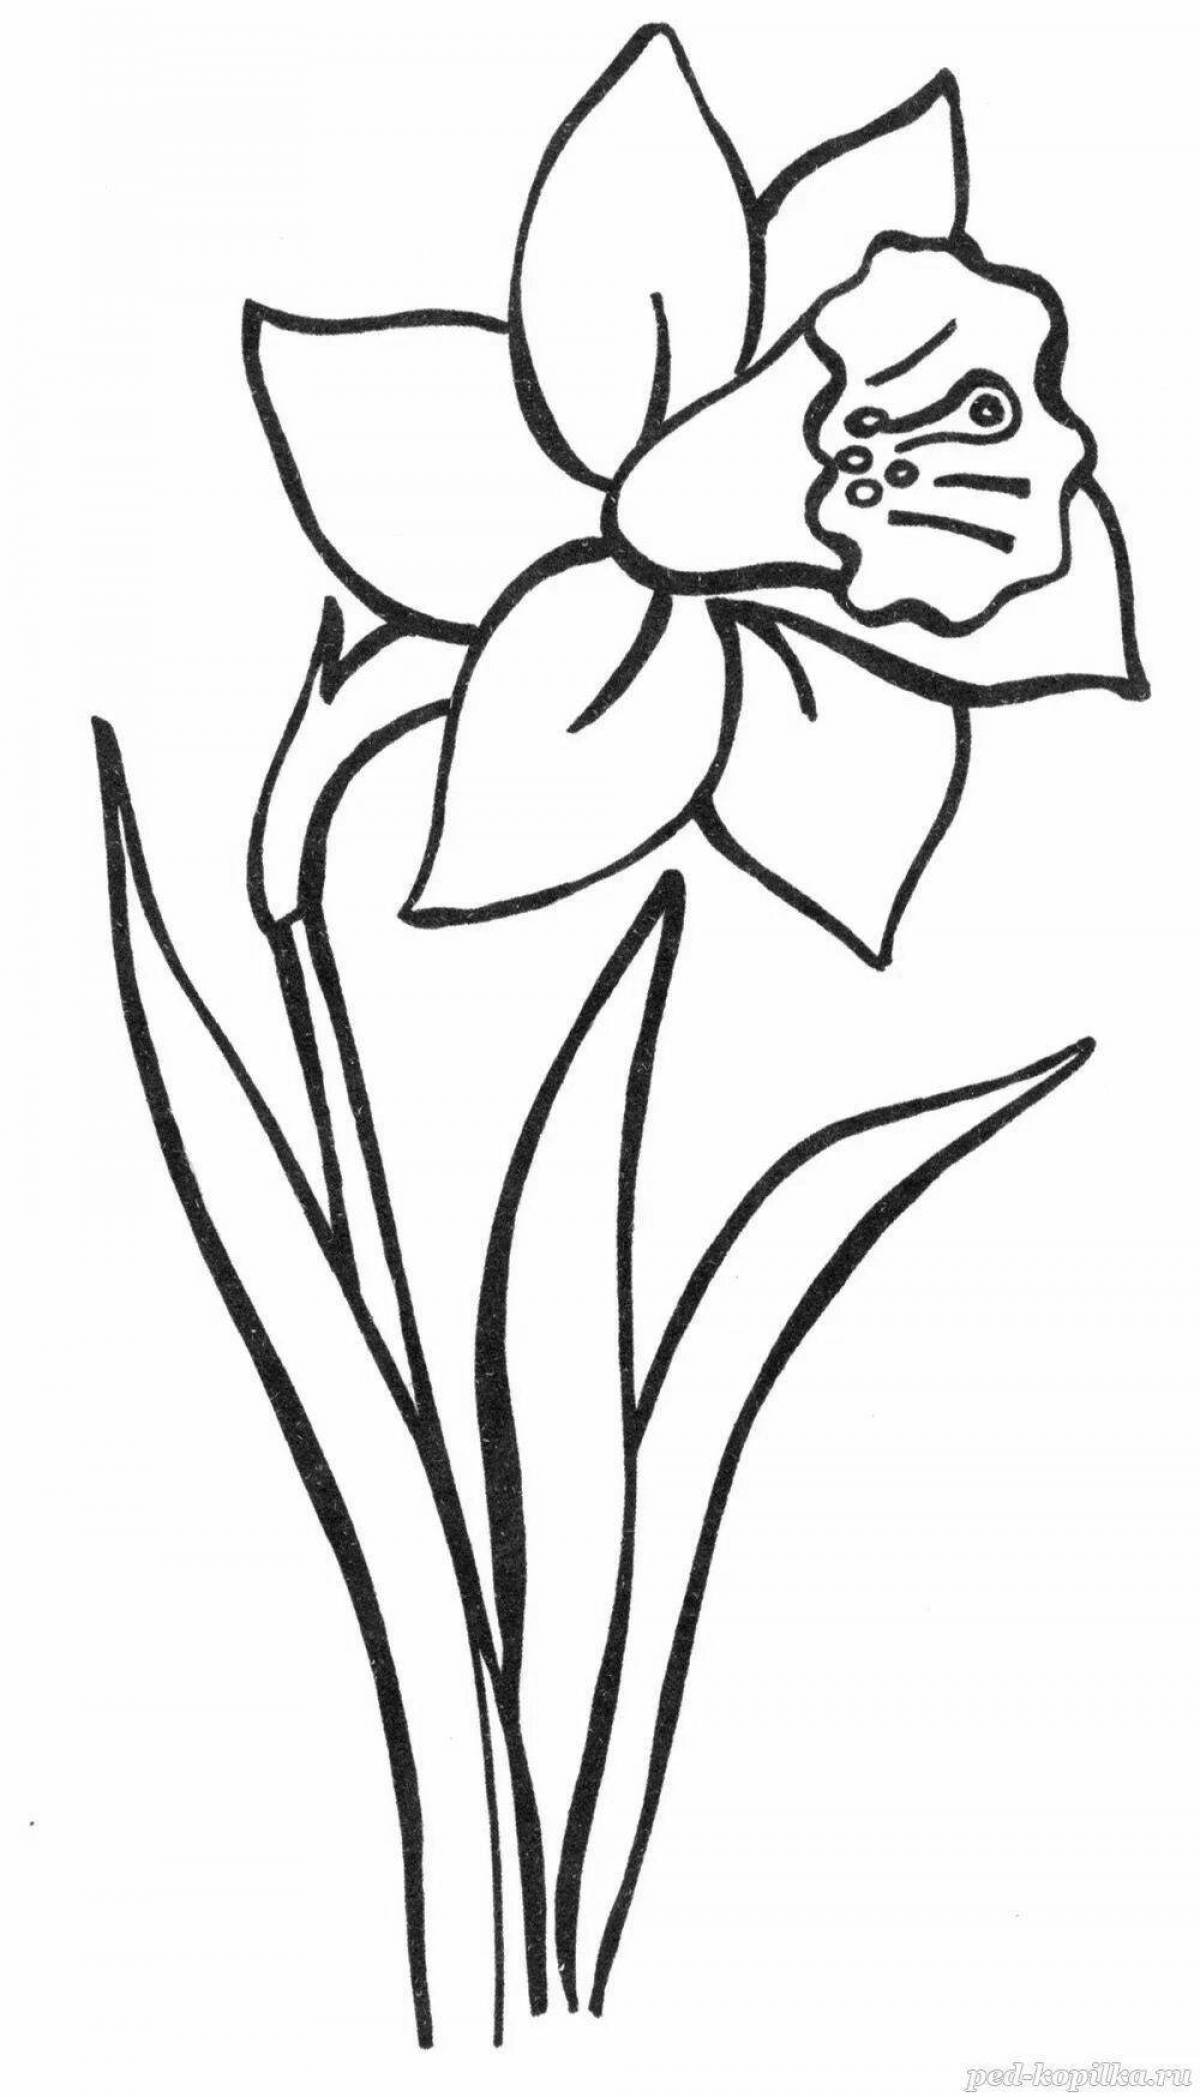 Attractive narcissus flower coloring page